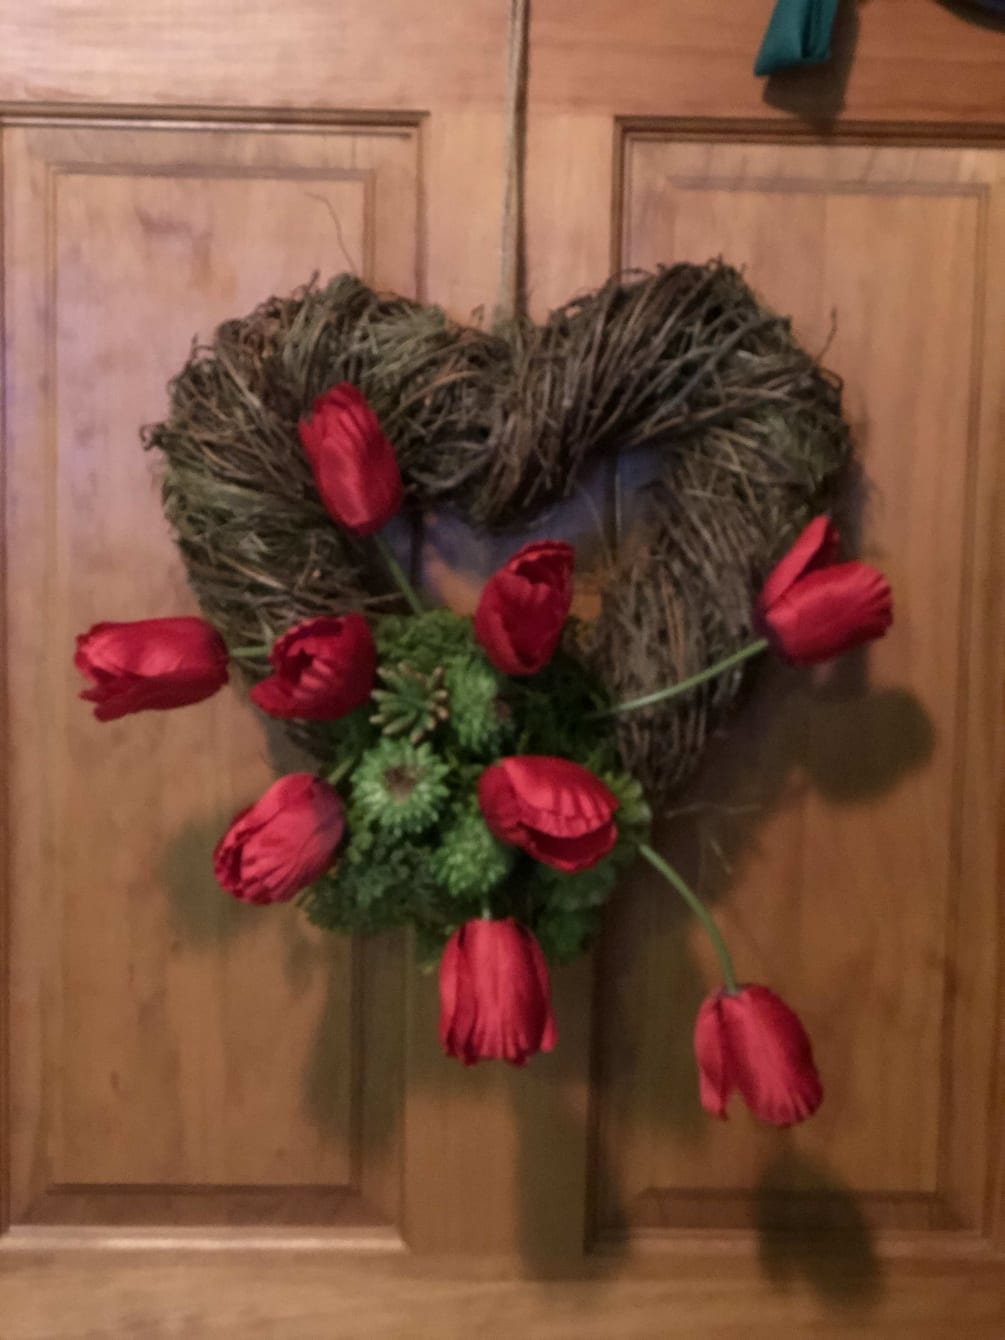 Our unique door decor starts with a twisted vine wreath in the